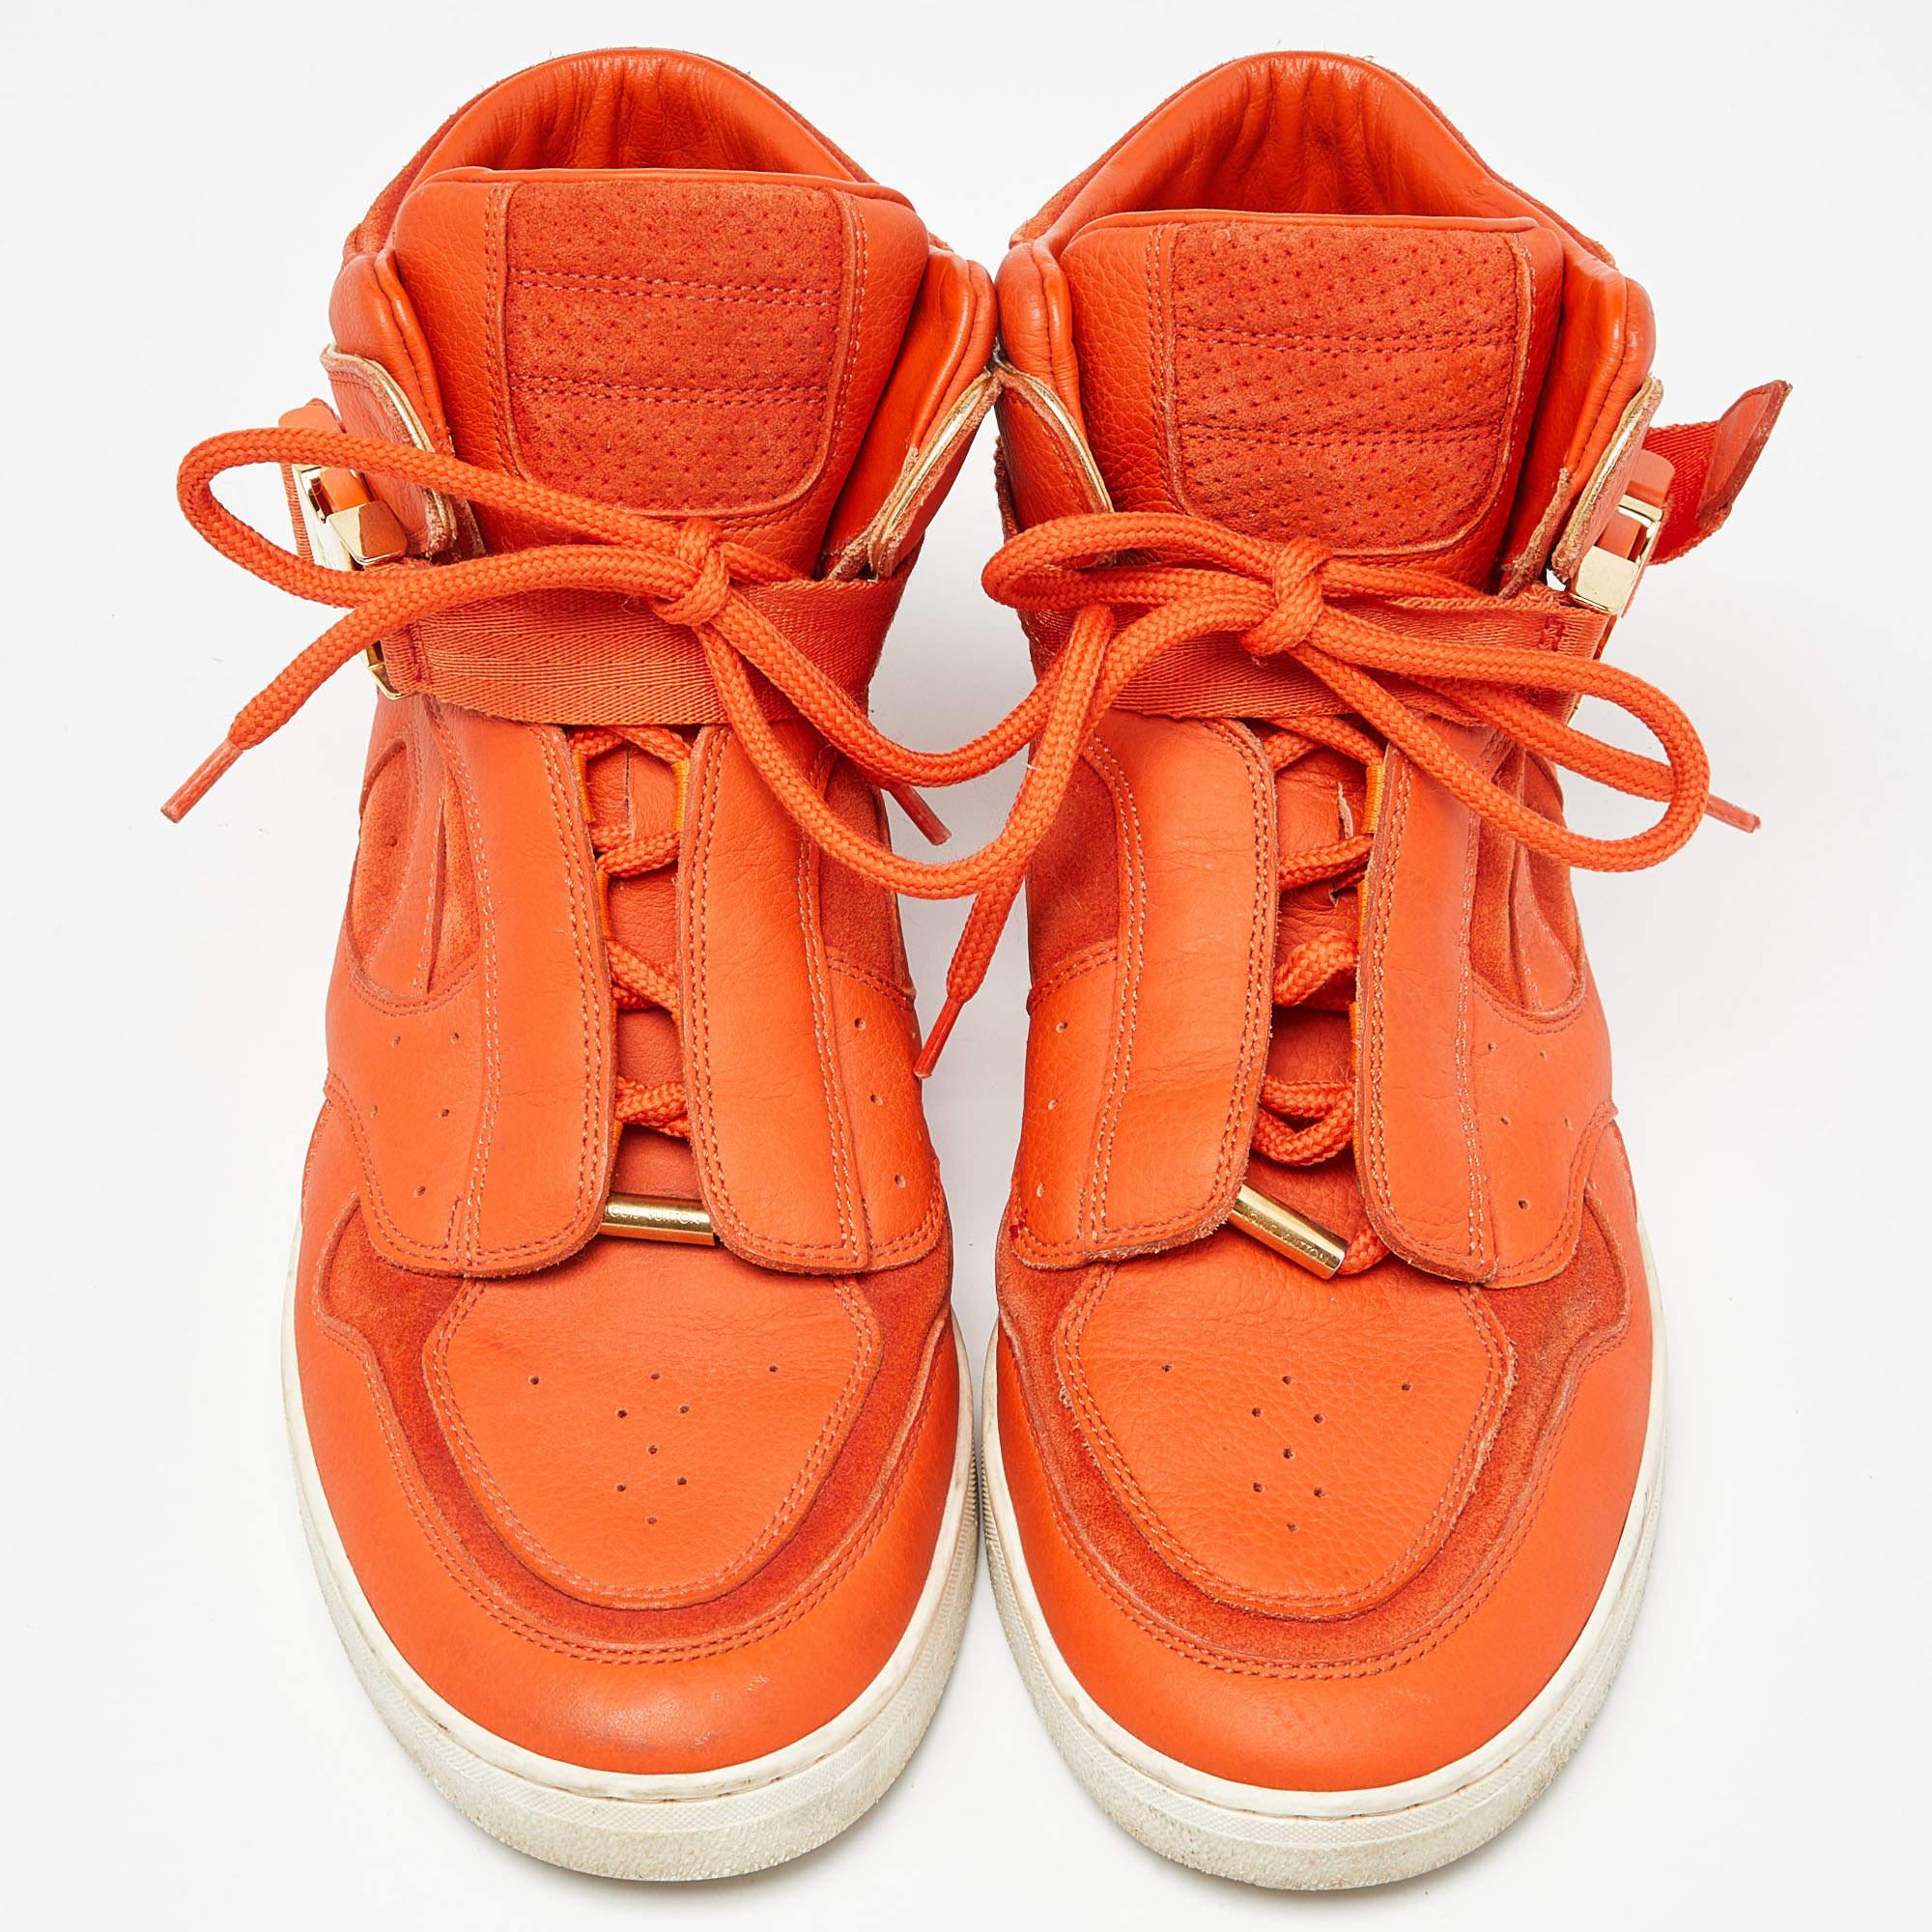 Louis Vuitton Orange Leather and Suede Slipstream High Top Sneakers Size 36 In Good Condition For Sale In Dubai, Al Qouz 2